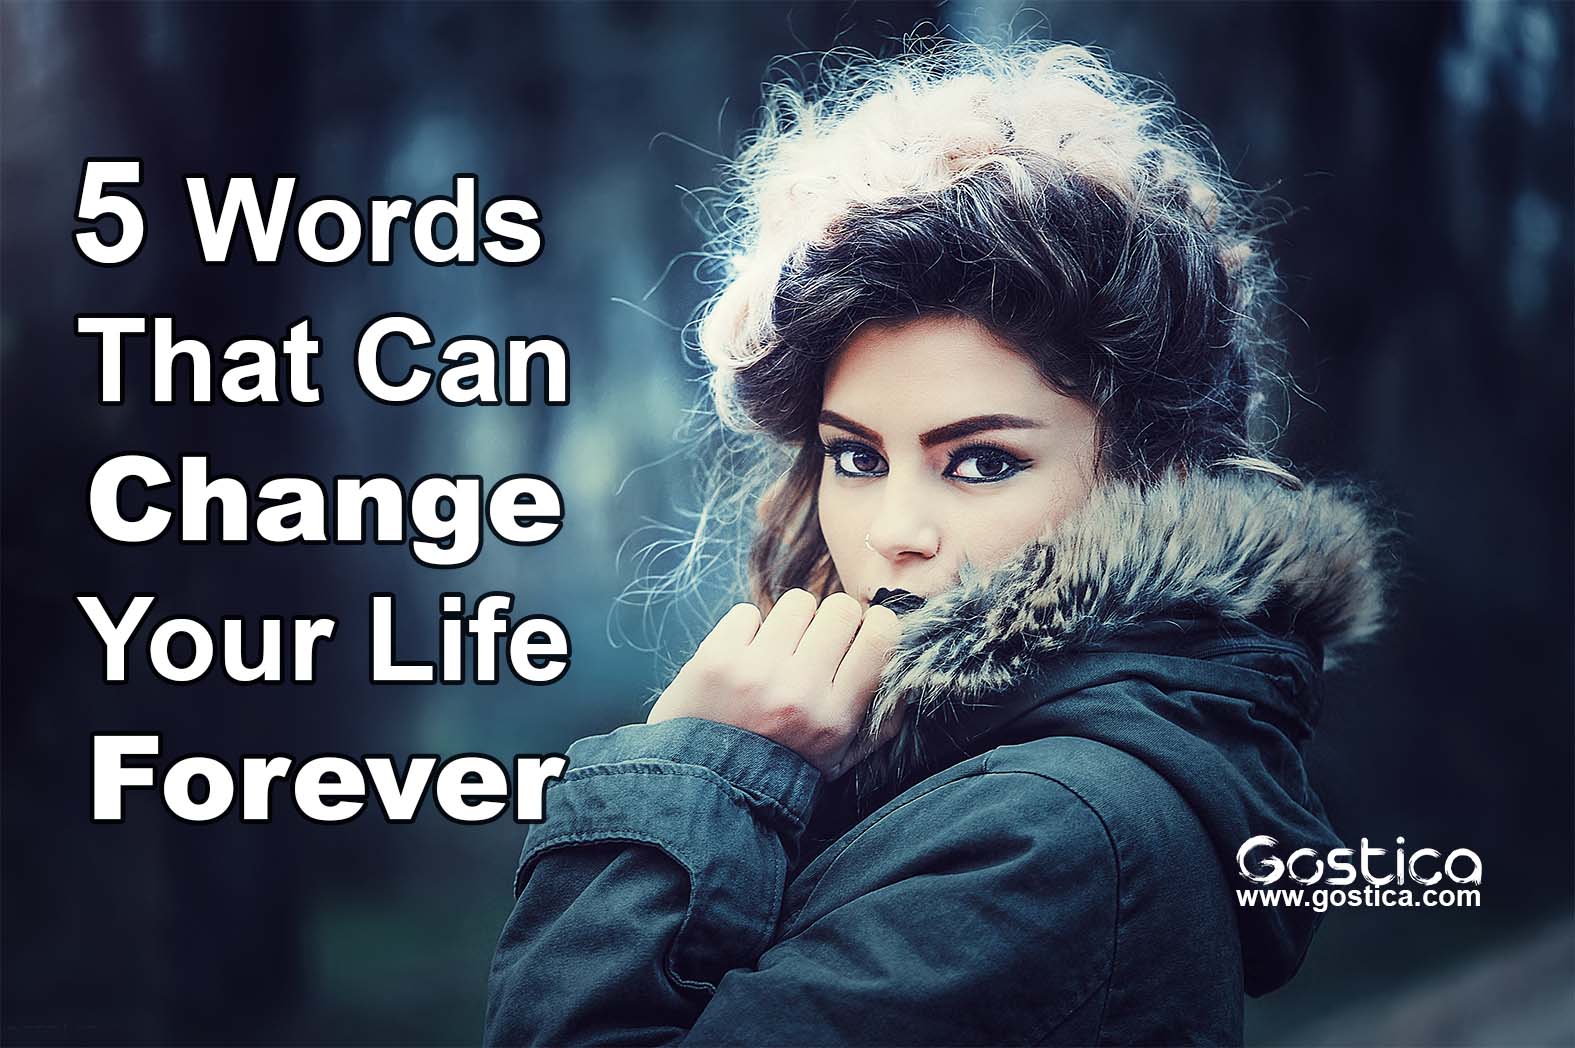 5-Words-That-Can-Change-Your-Life-Forever.jpg